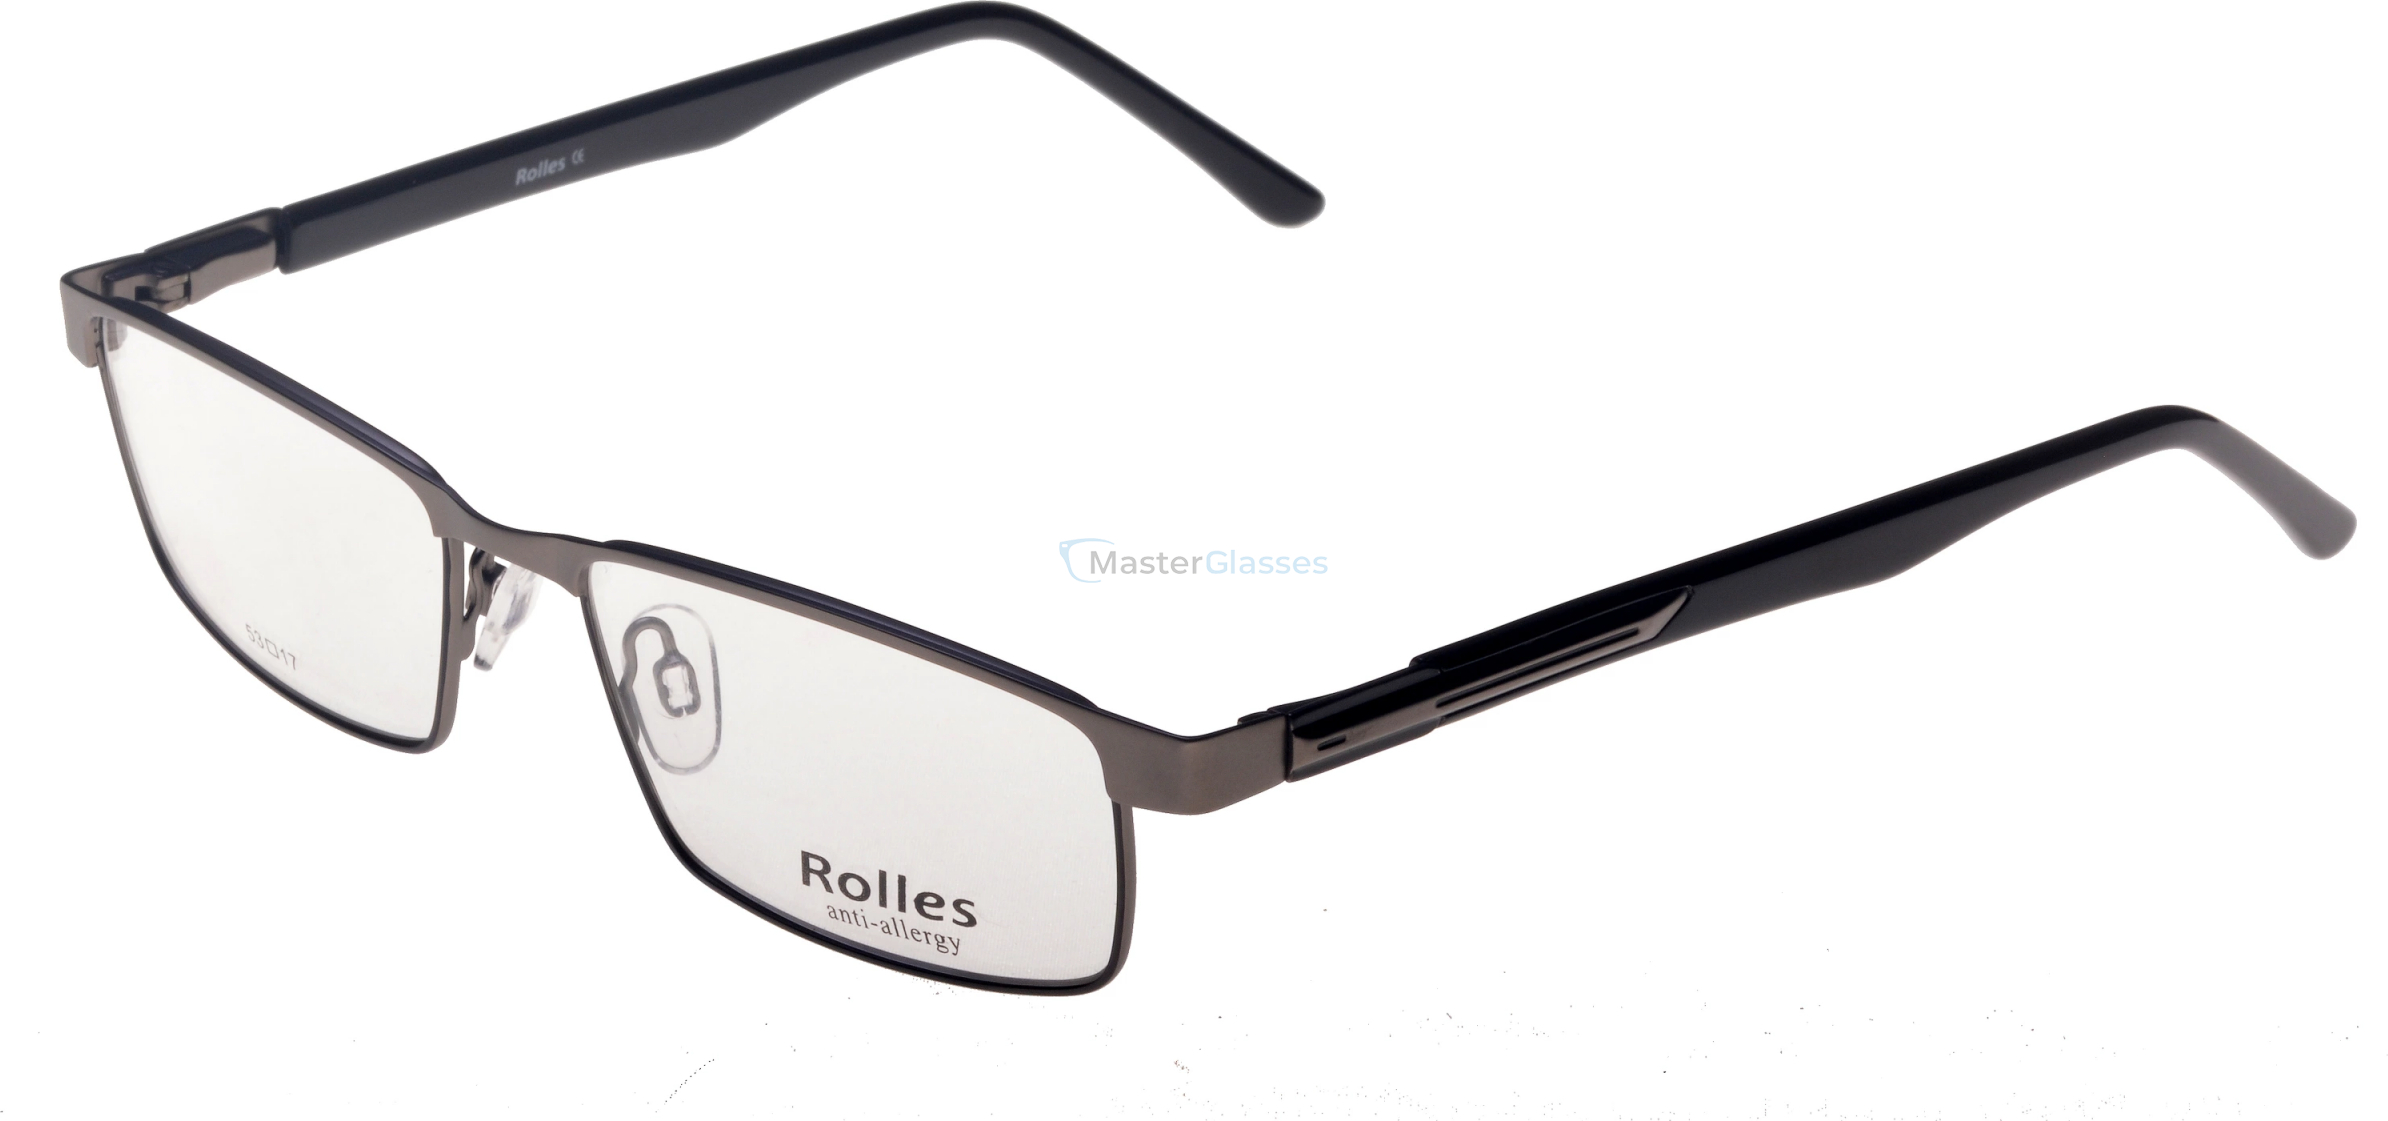  Rolles 577 01